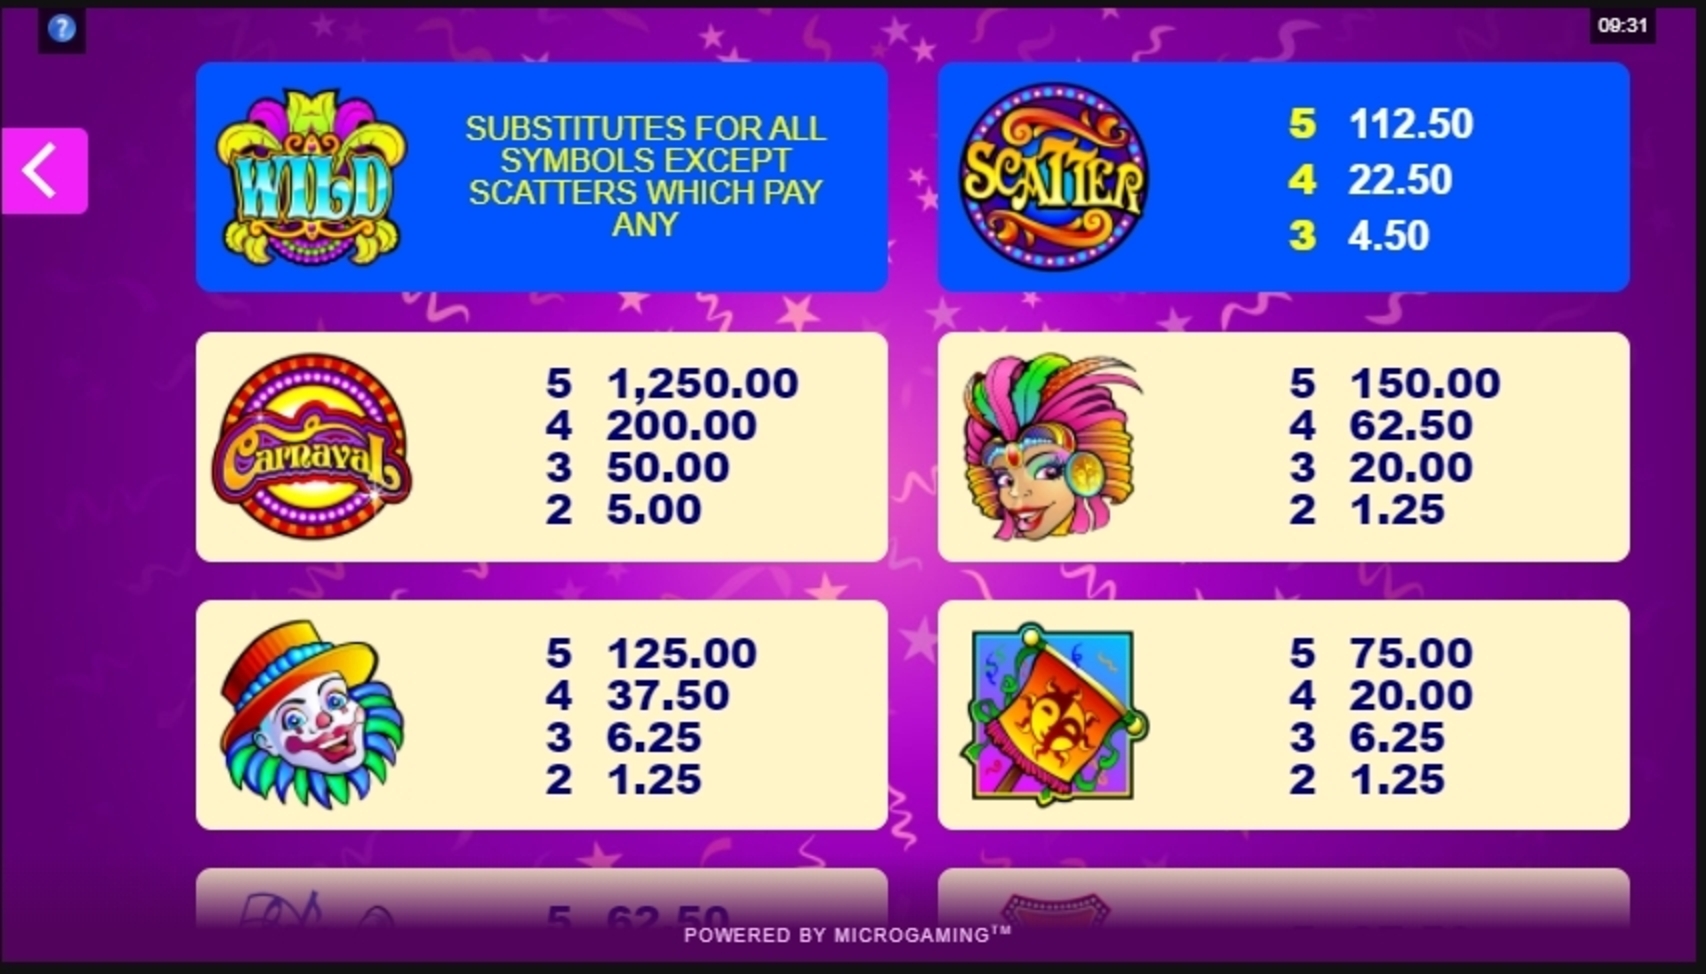 Info of Carnaval Slot Game by Microgaming